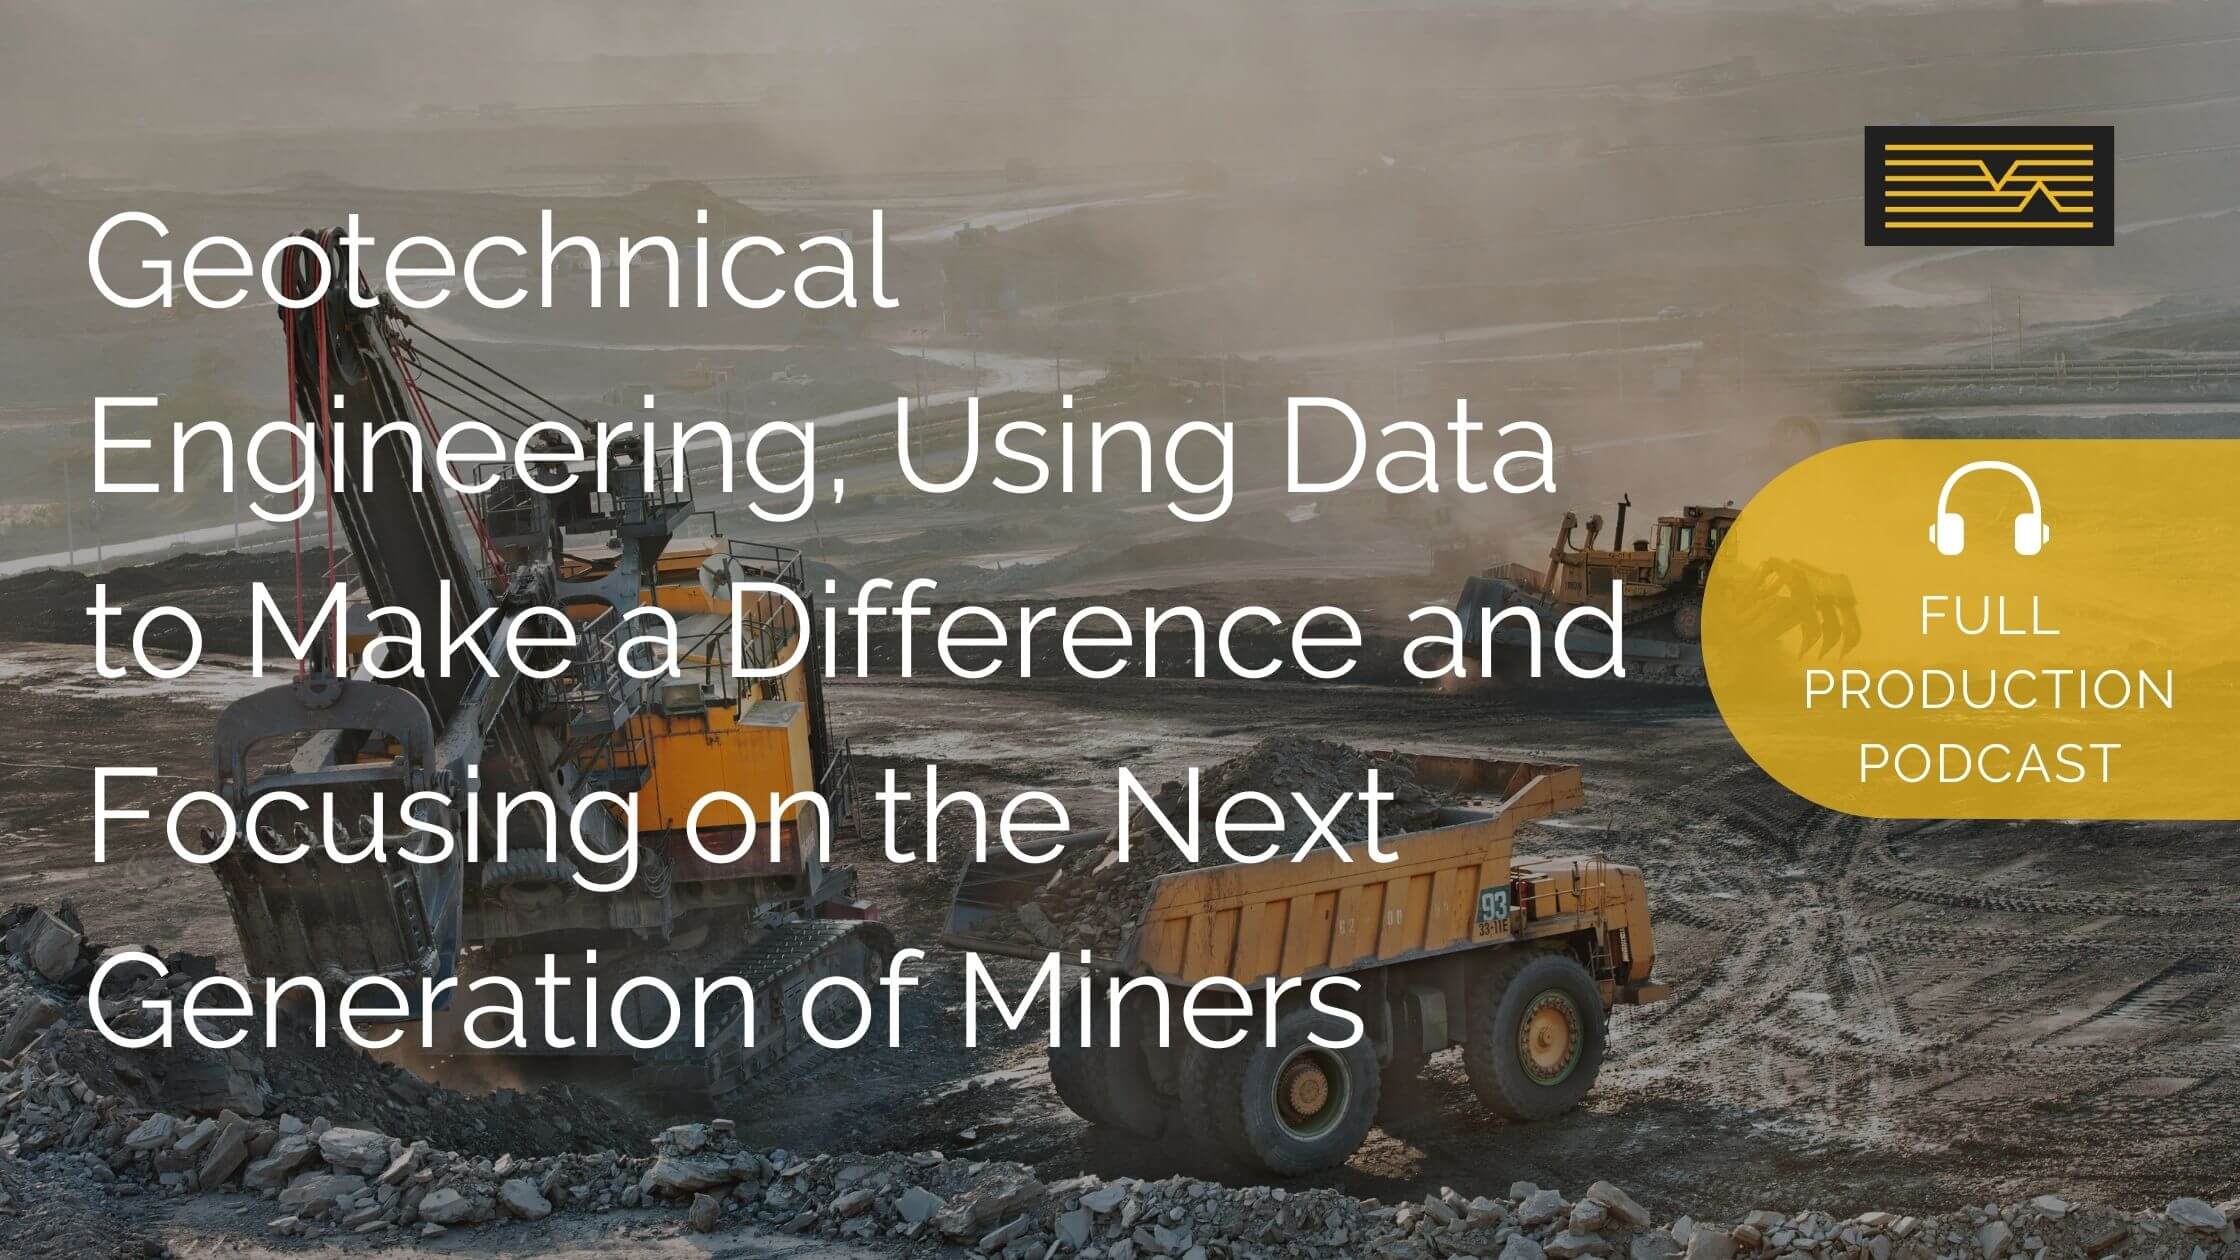 Geotechnical Engineering, Using Data to Make a Difference and Focusing on the Next Generation of Miners